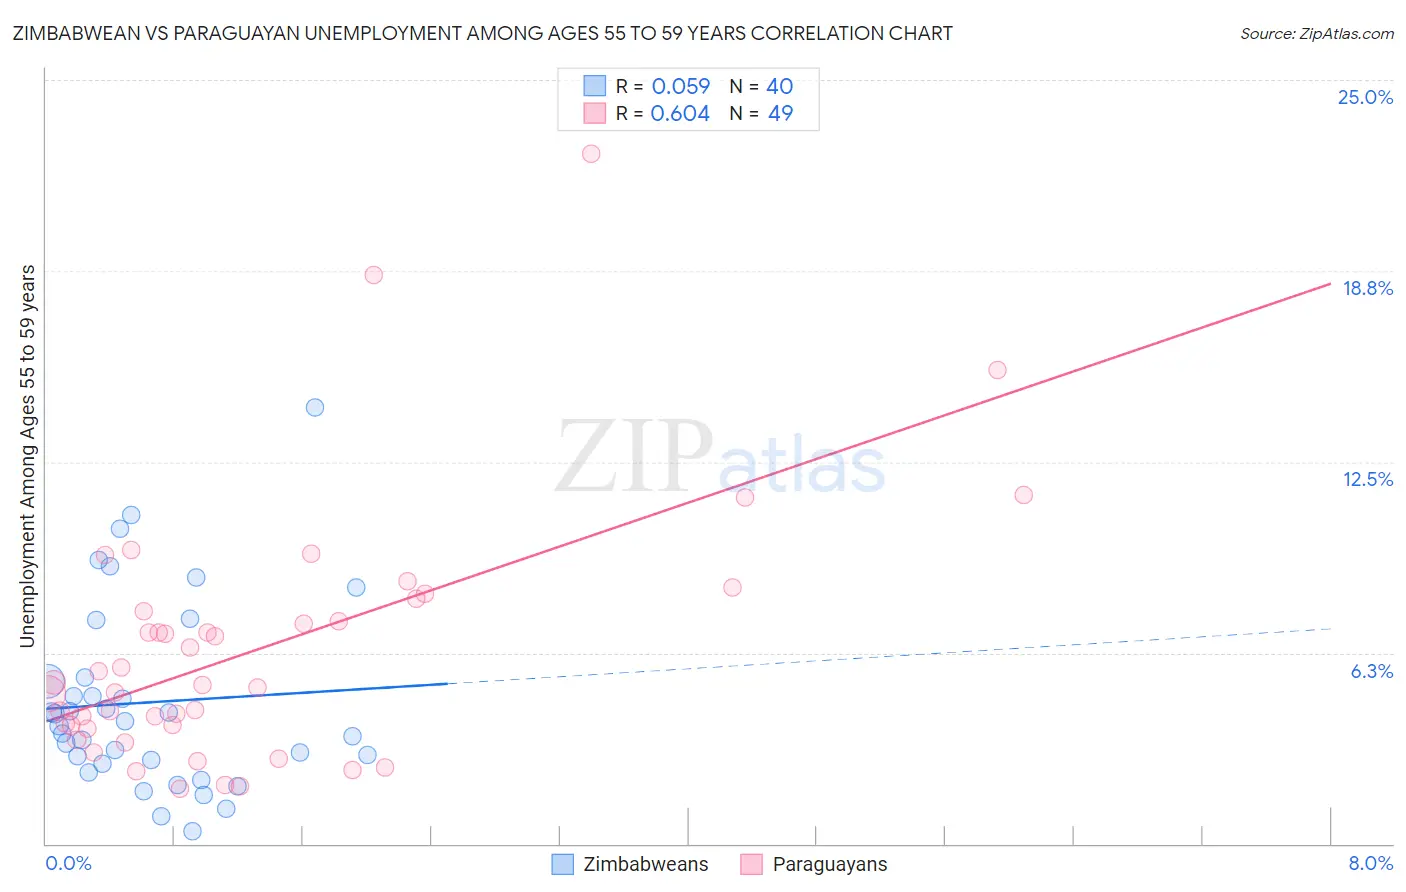 Zimbabwean vs Paraguayan Unemployment Among Ages 55 to 59 years